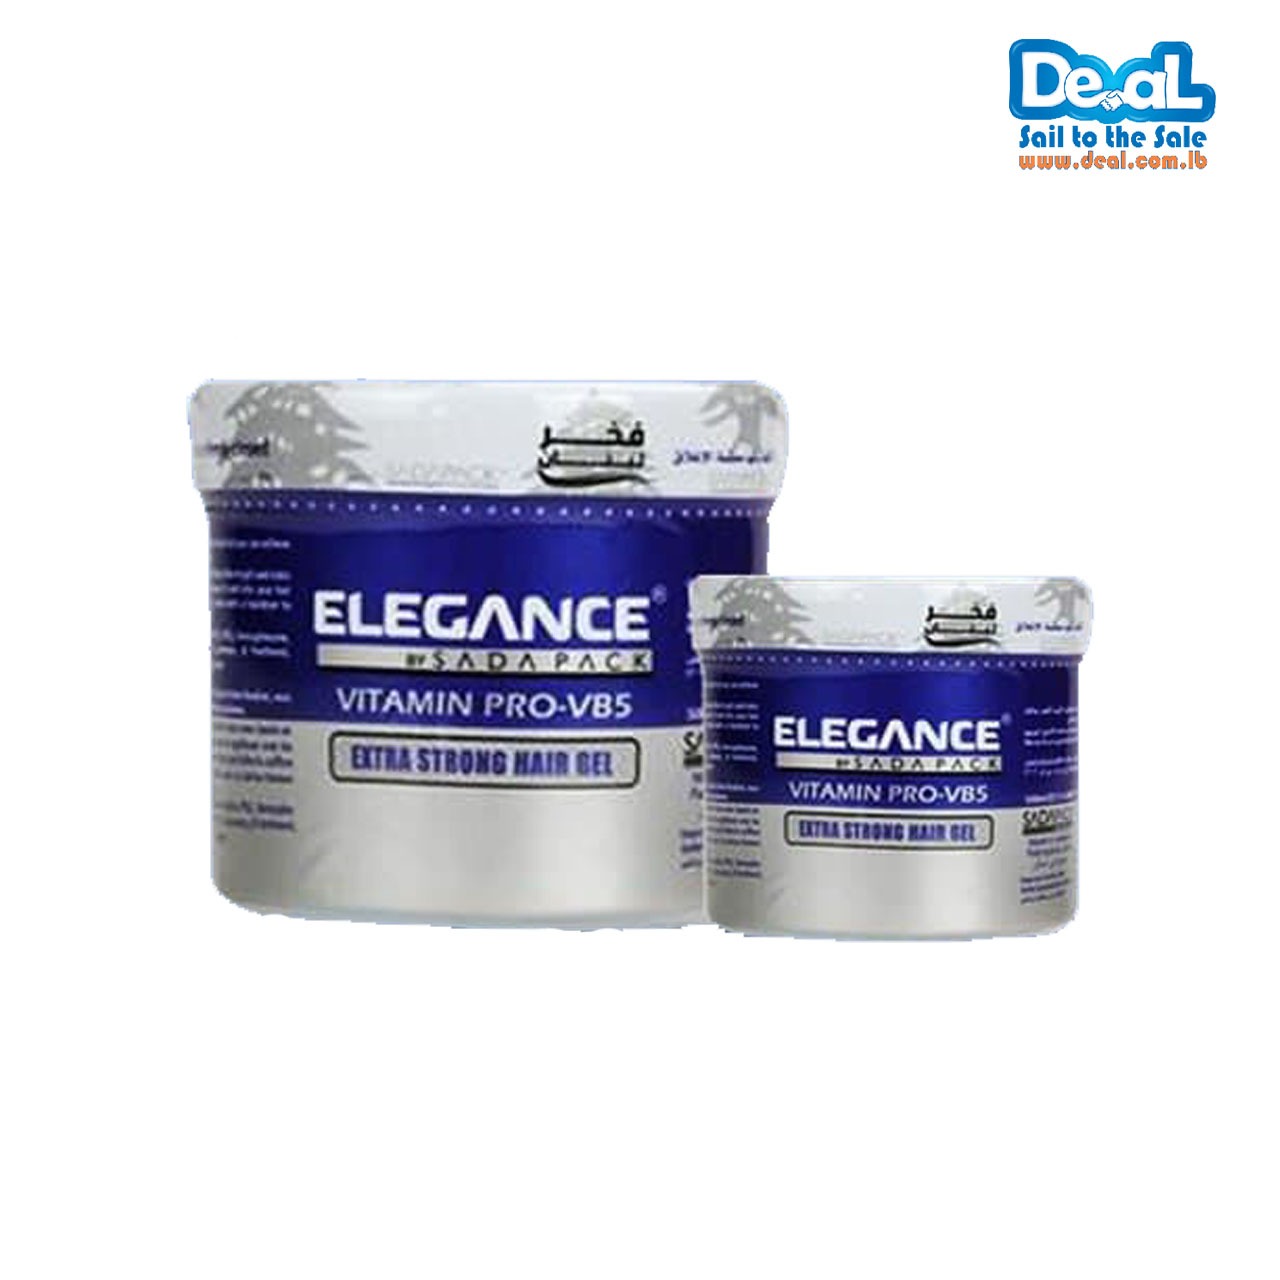 Elegance+By+Sada+Pack+Extra+Strong+Hair+Gel+250+ML+and+100+ML